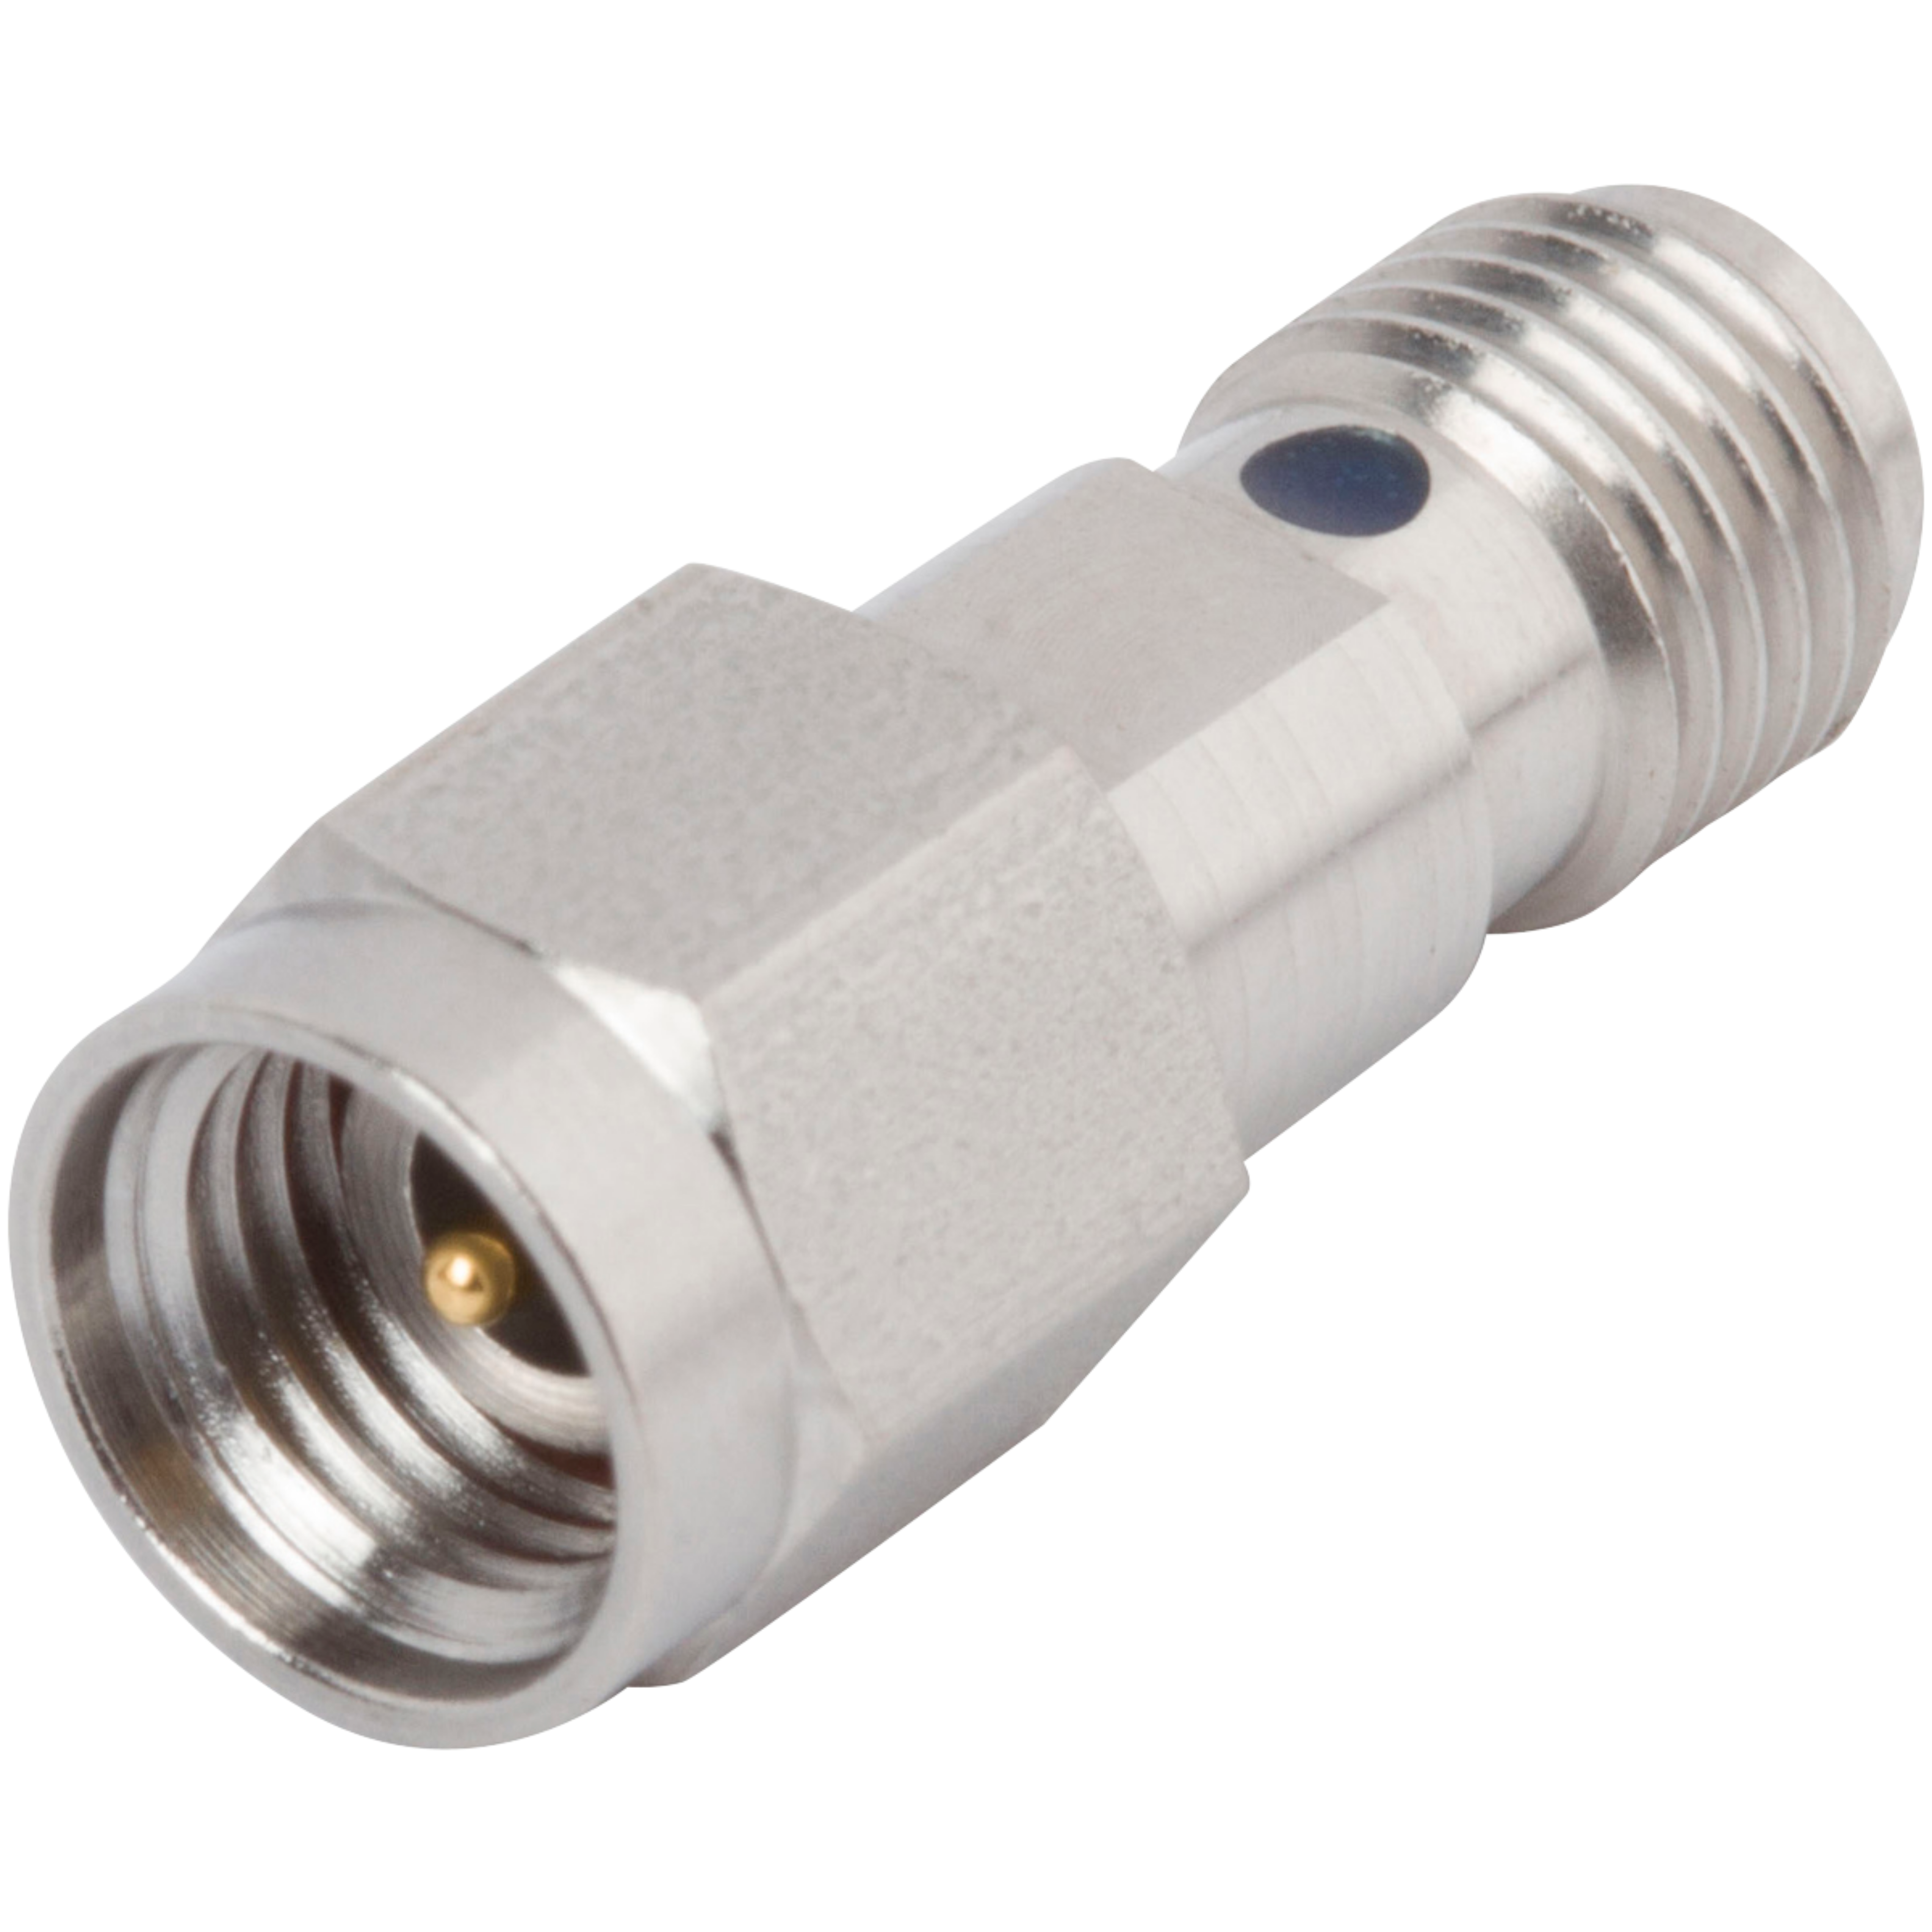 2.92mm Male to SMA Female Adapter, SF1115-6009